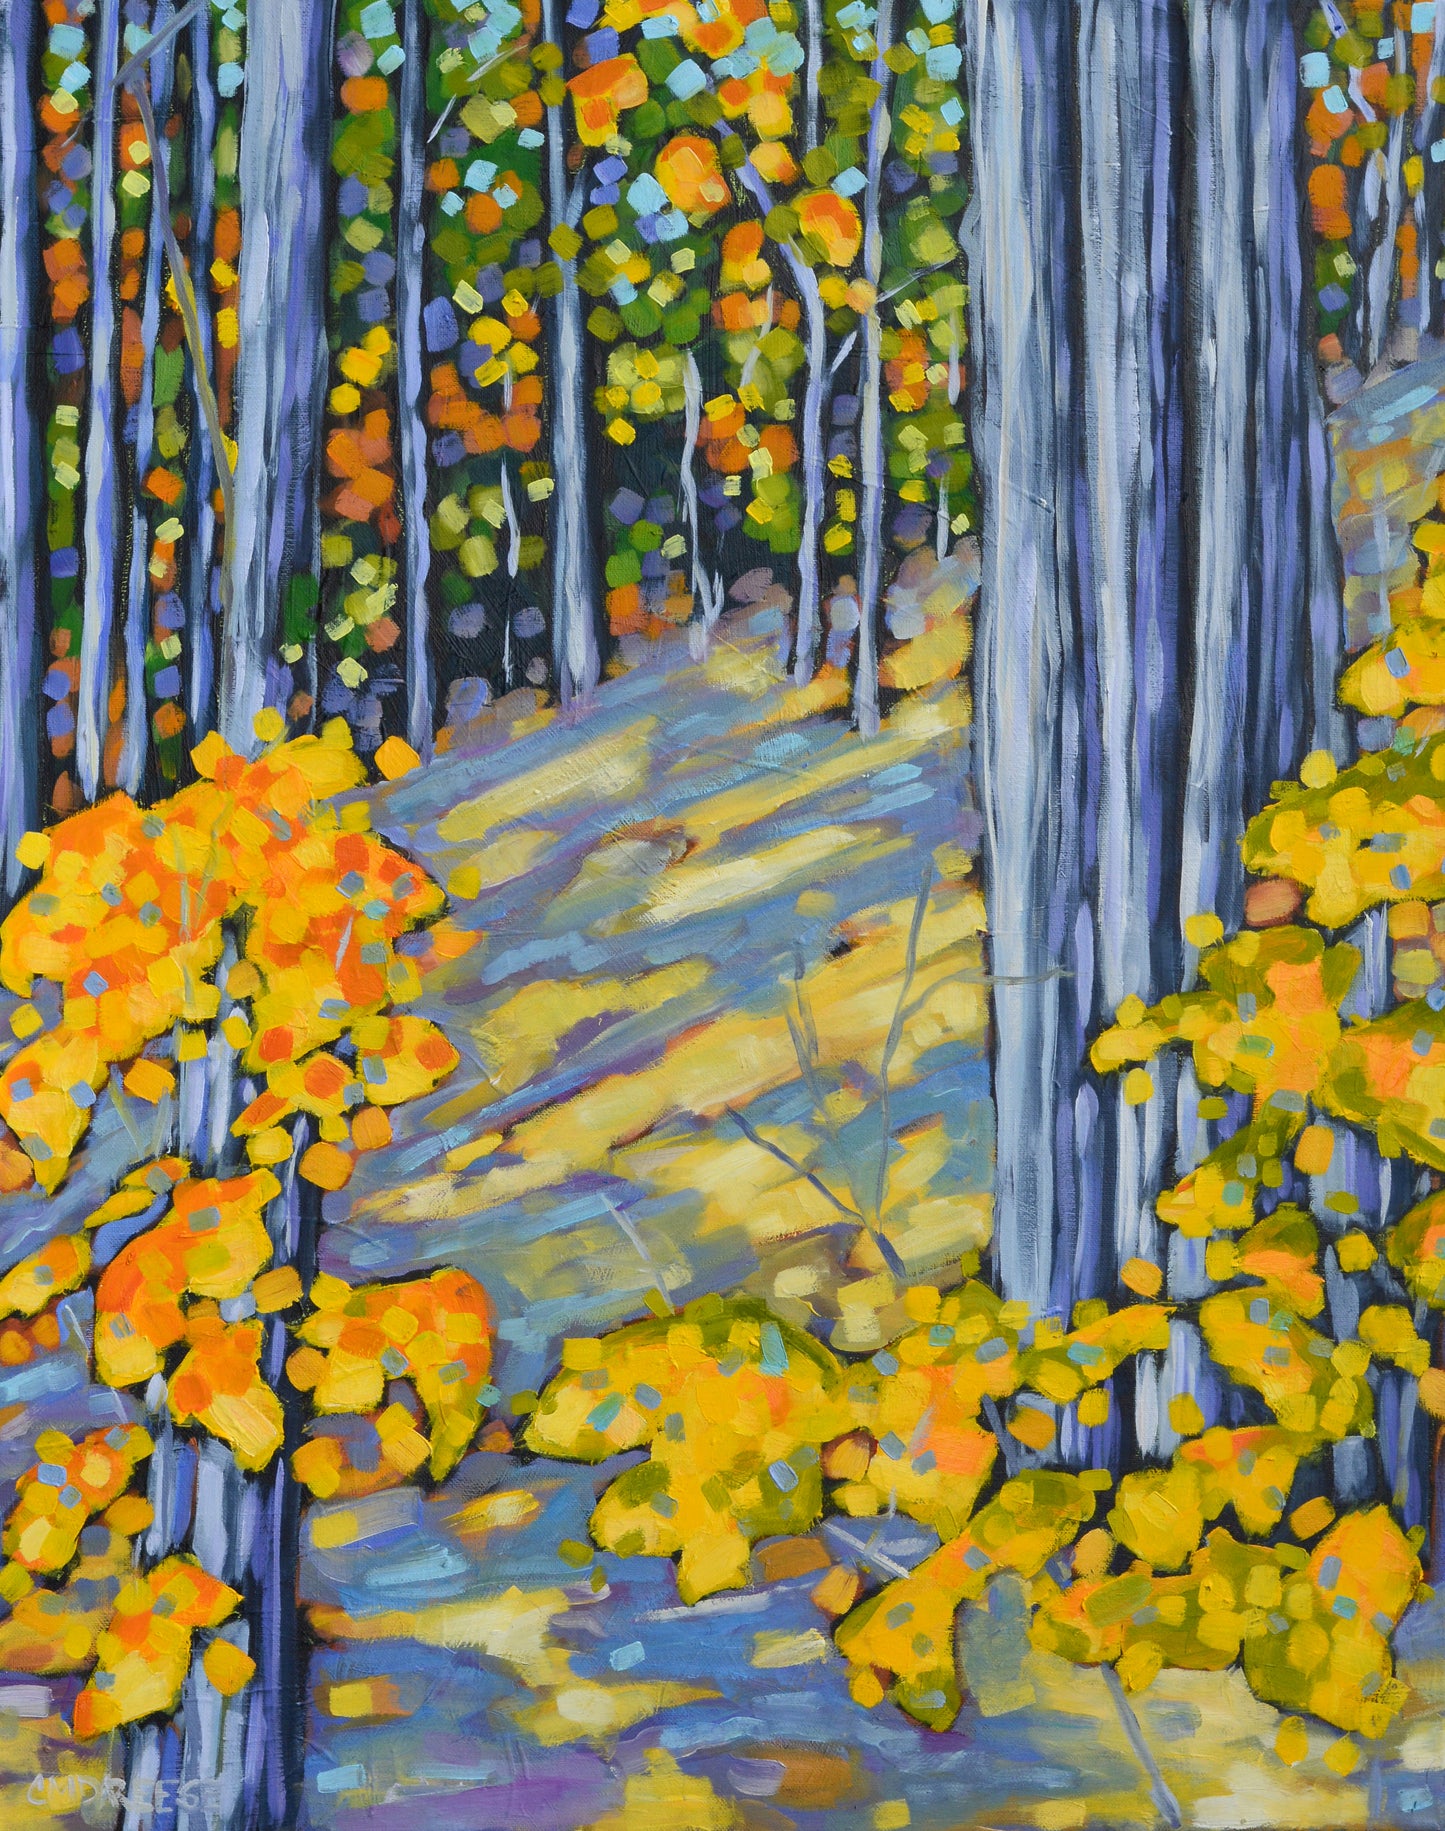 "Sweet Autumn" Original Oil Painting on Canvas by Christi Dreese